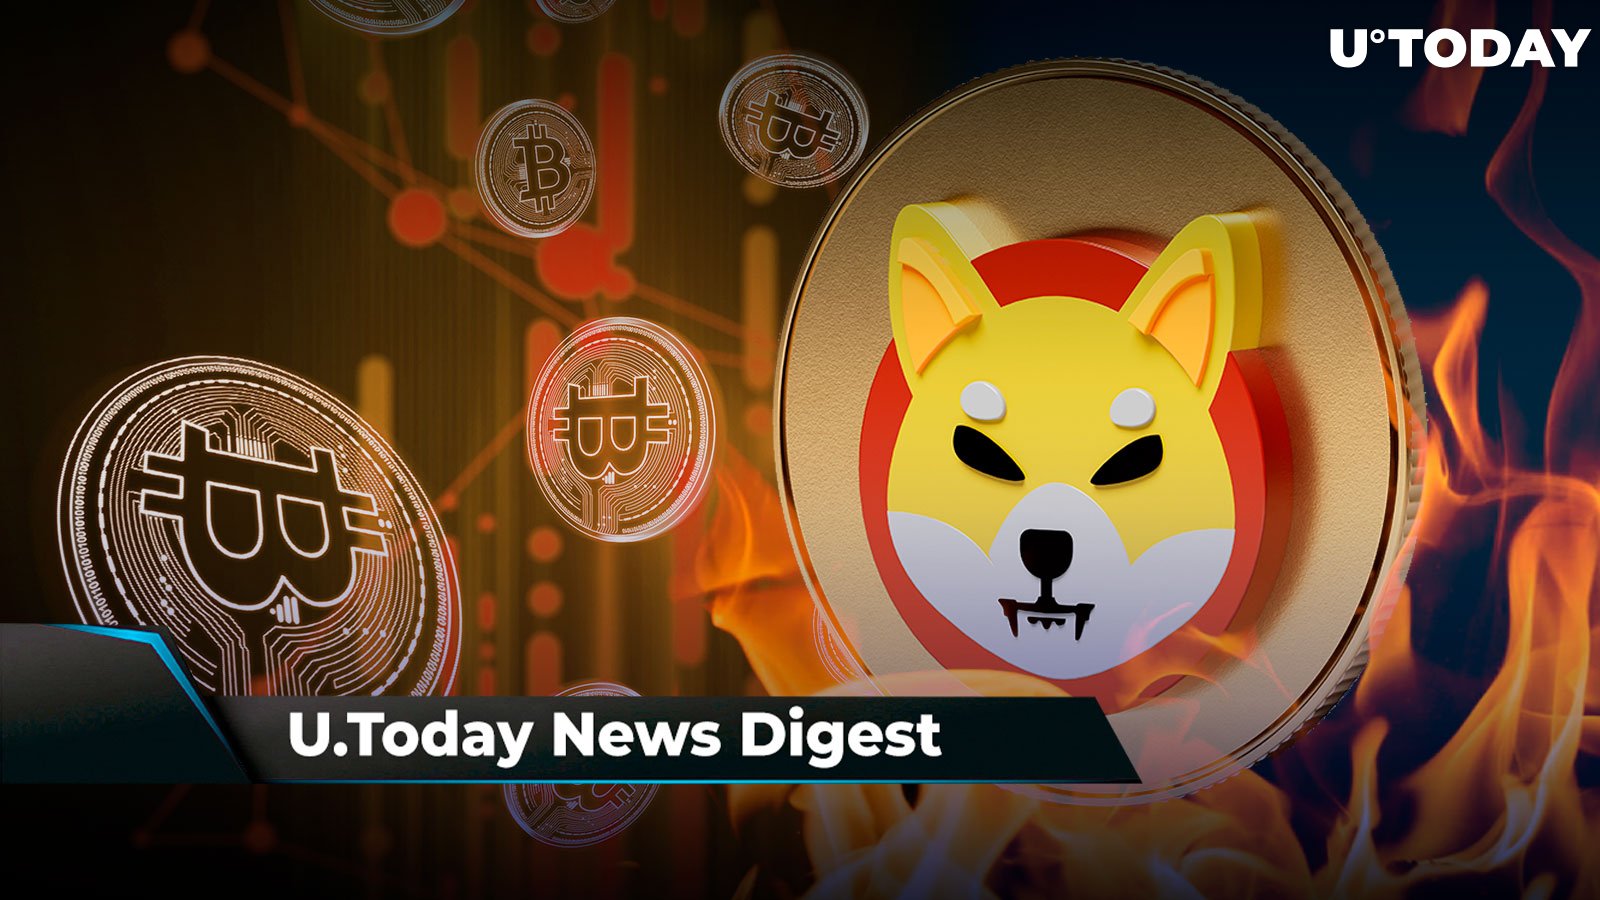 56 Million SHIB Burned, Ripple Expands to Europe Luxury Market, Here’s Who Dumps BTC on Crypto Market: Crypto News Digest by U.Today